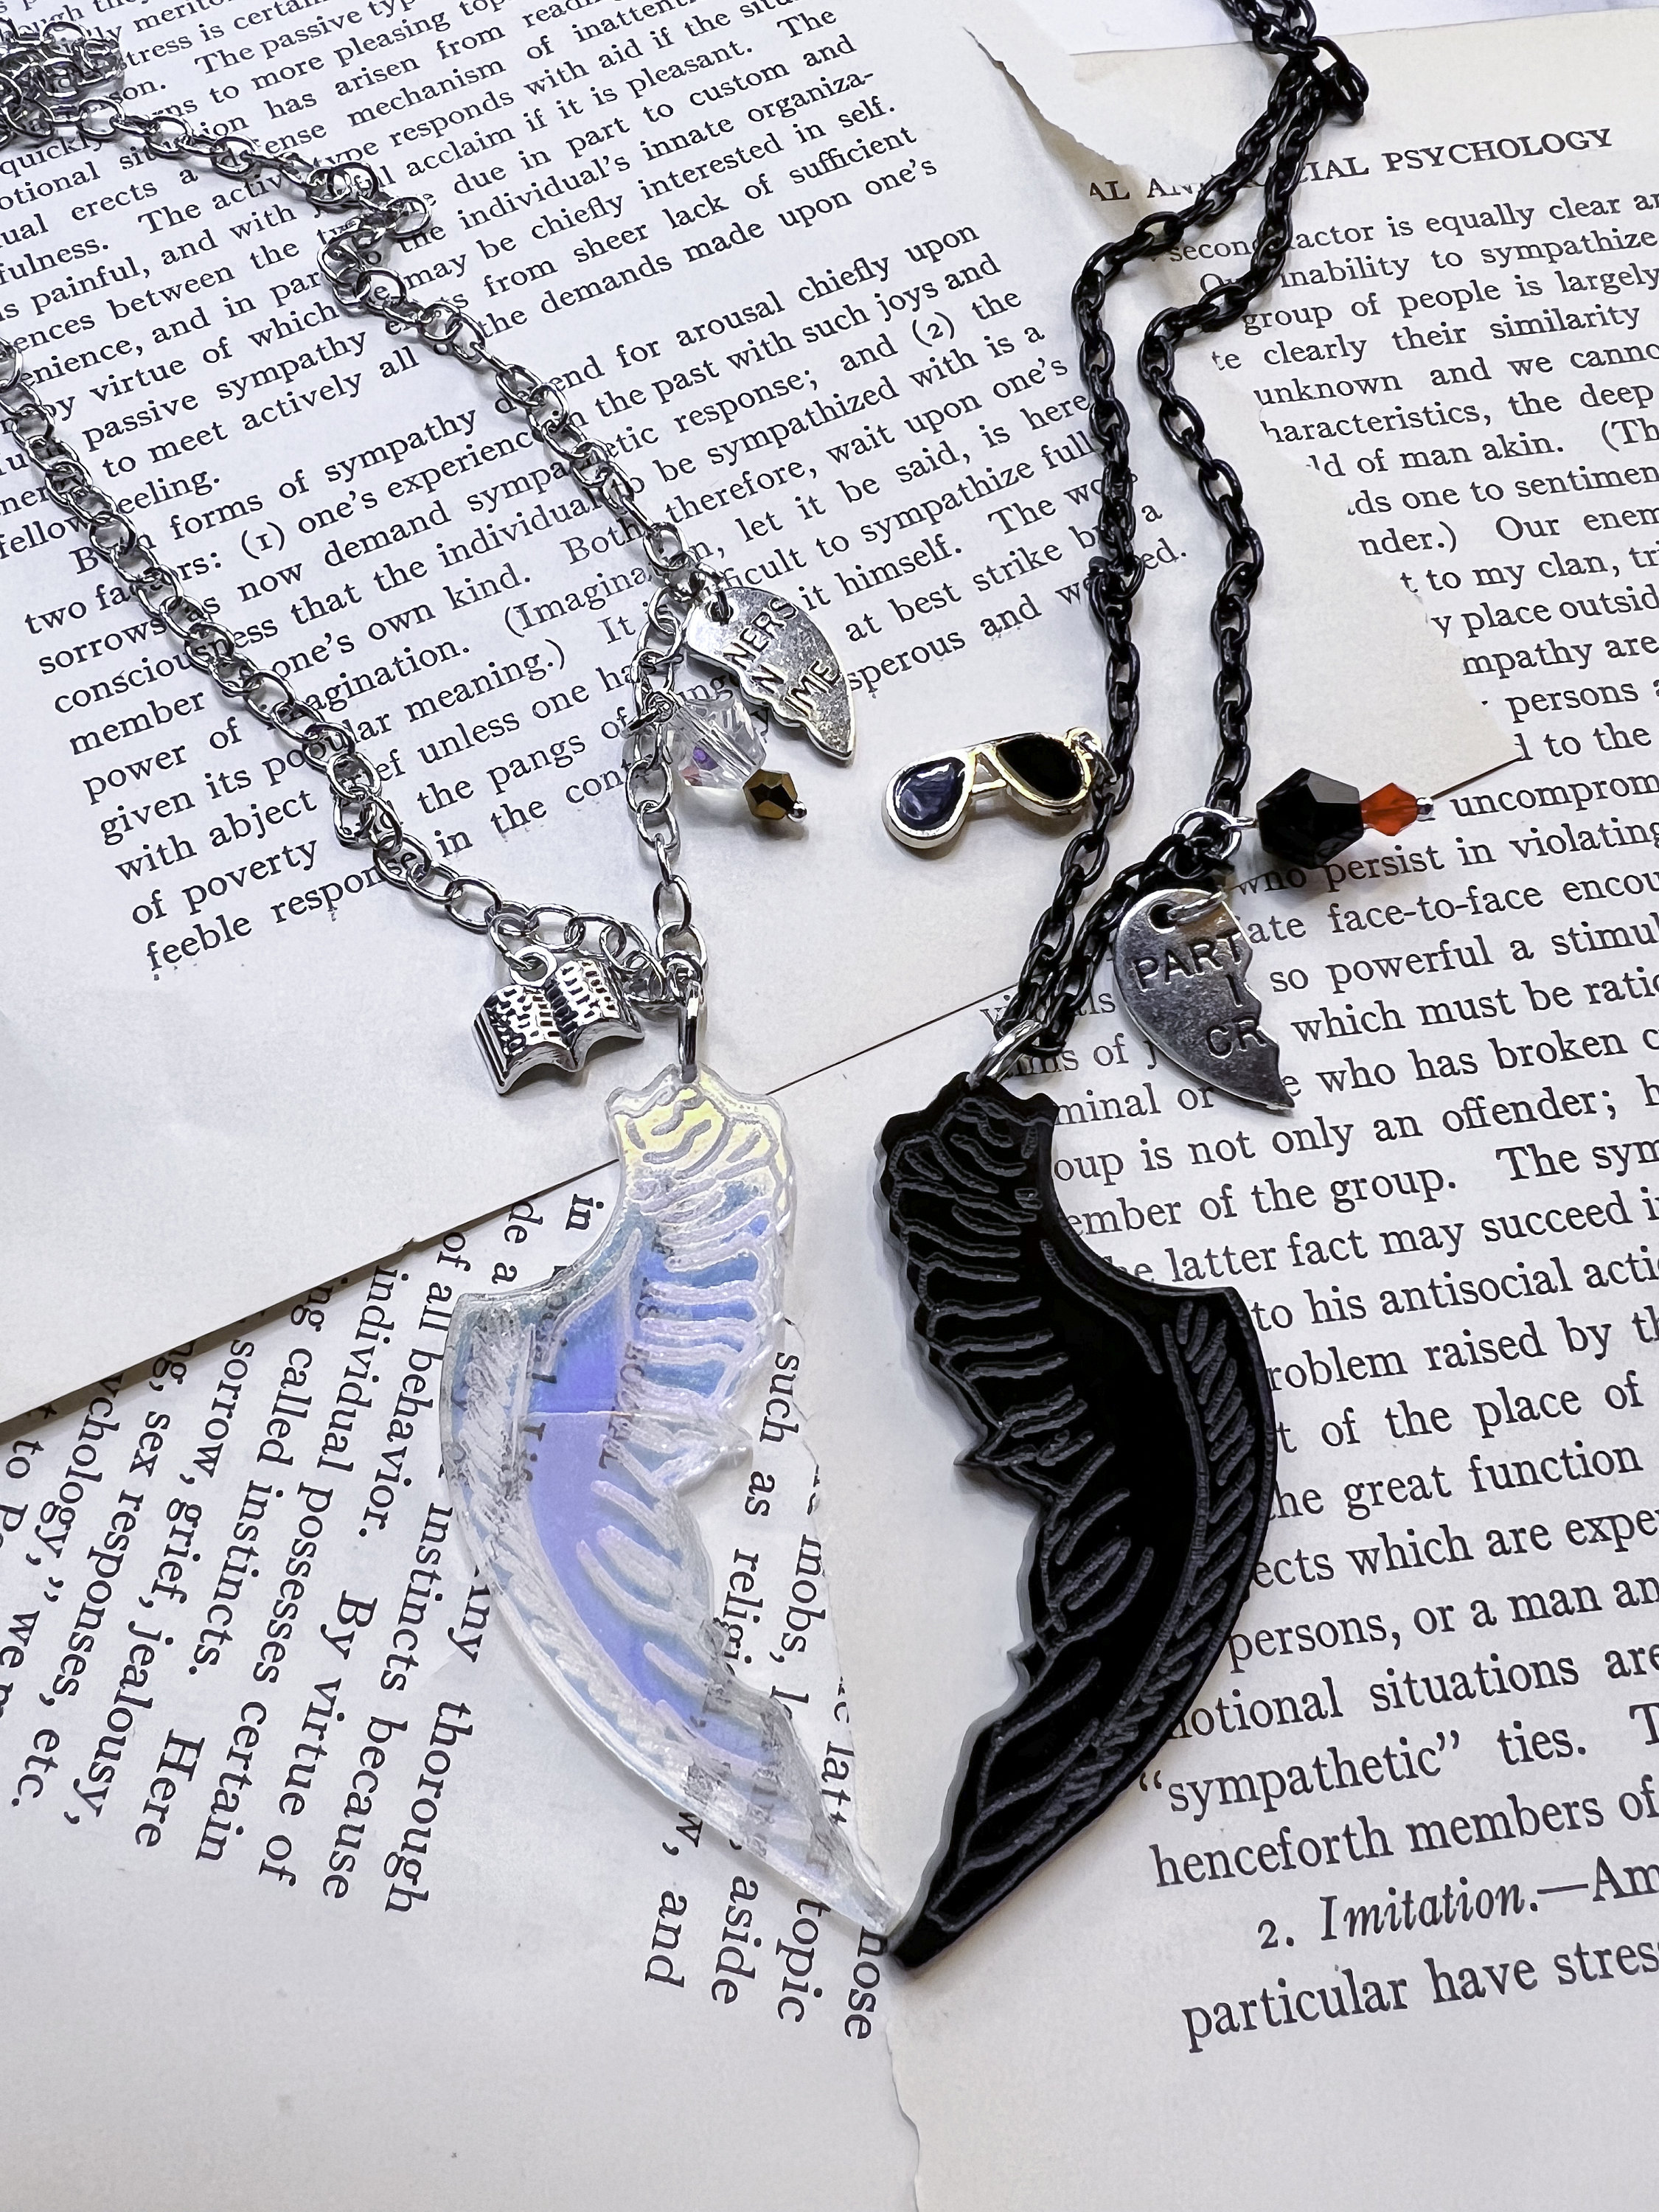 To my Angel, my Guide and my Best Friend - Necklace for Mom (Love